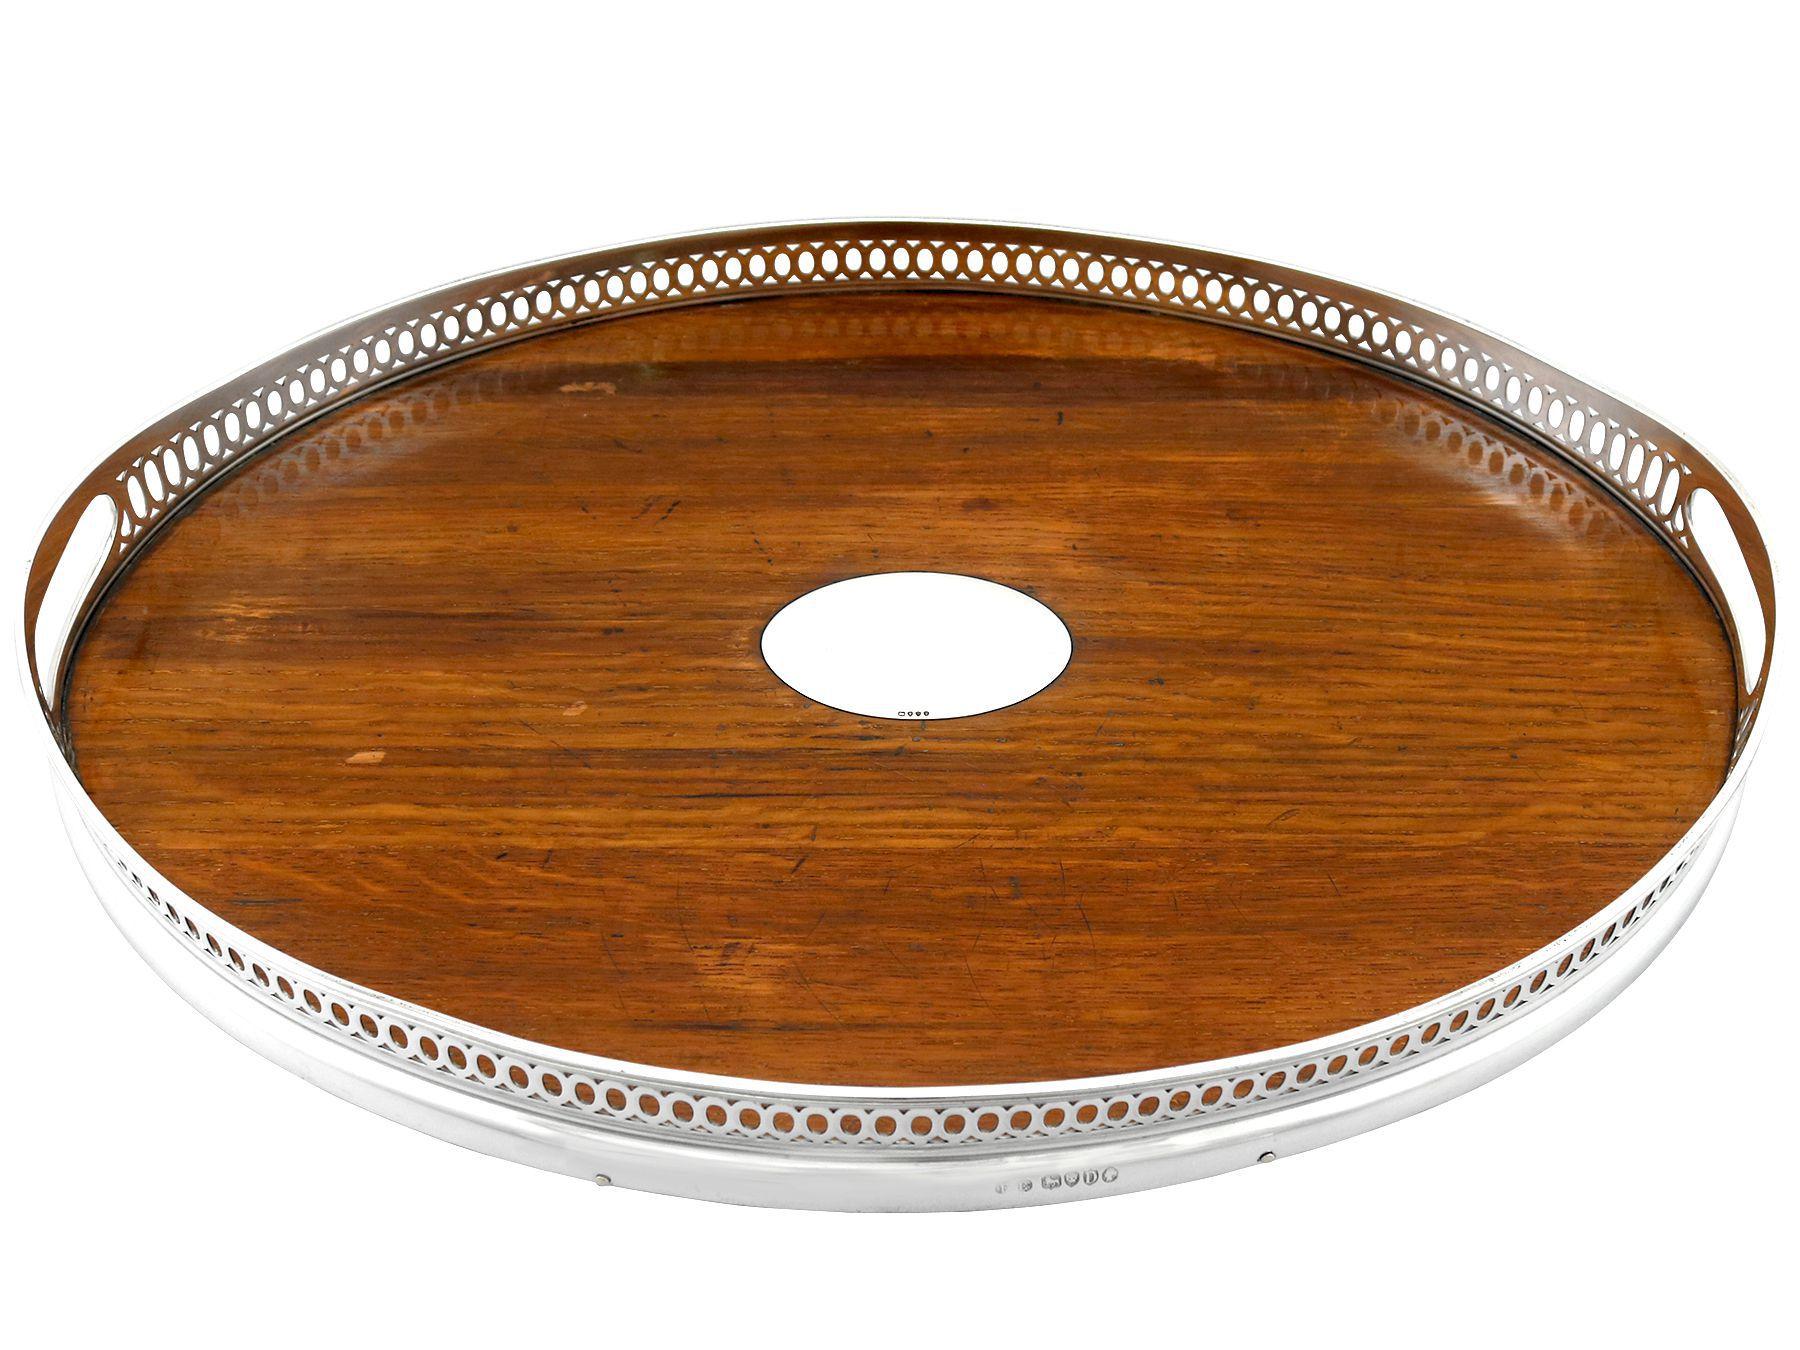 An exceptional, fine and impressive, antique Victorian English sterling silver and wood galleried tray; an addition to our Victorian teaware collection.

This exceptional antique Victorian sterling silver gallery tray has an oval form.

The deep